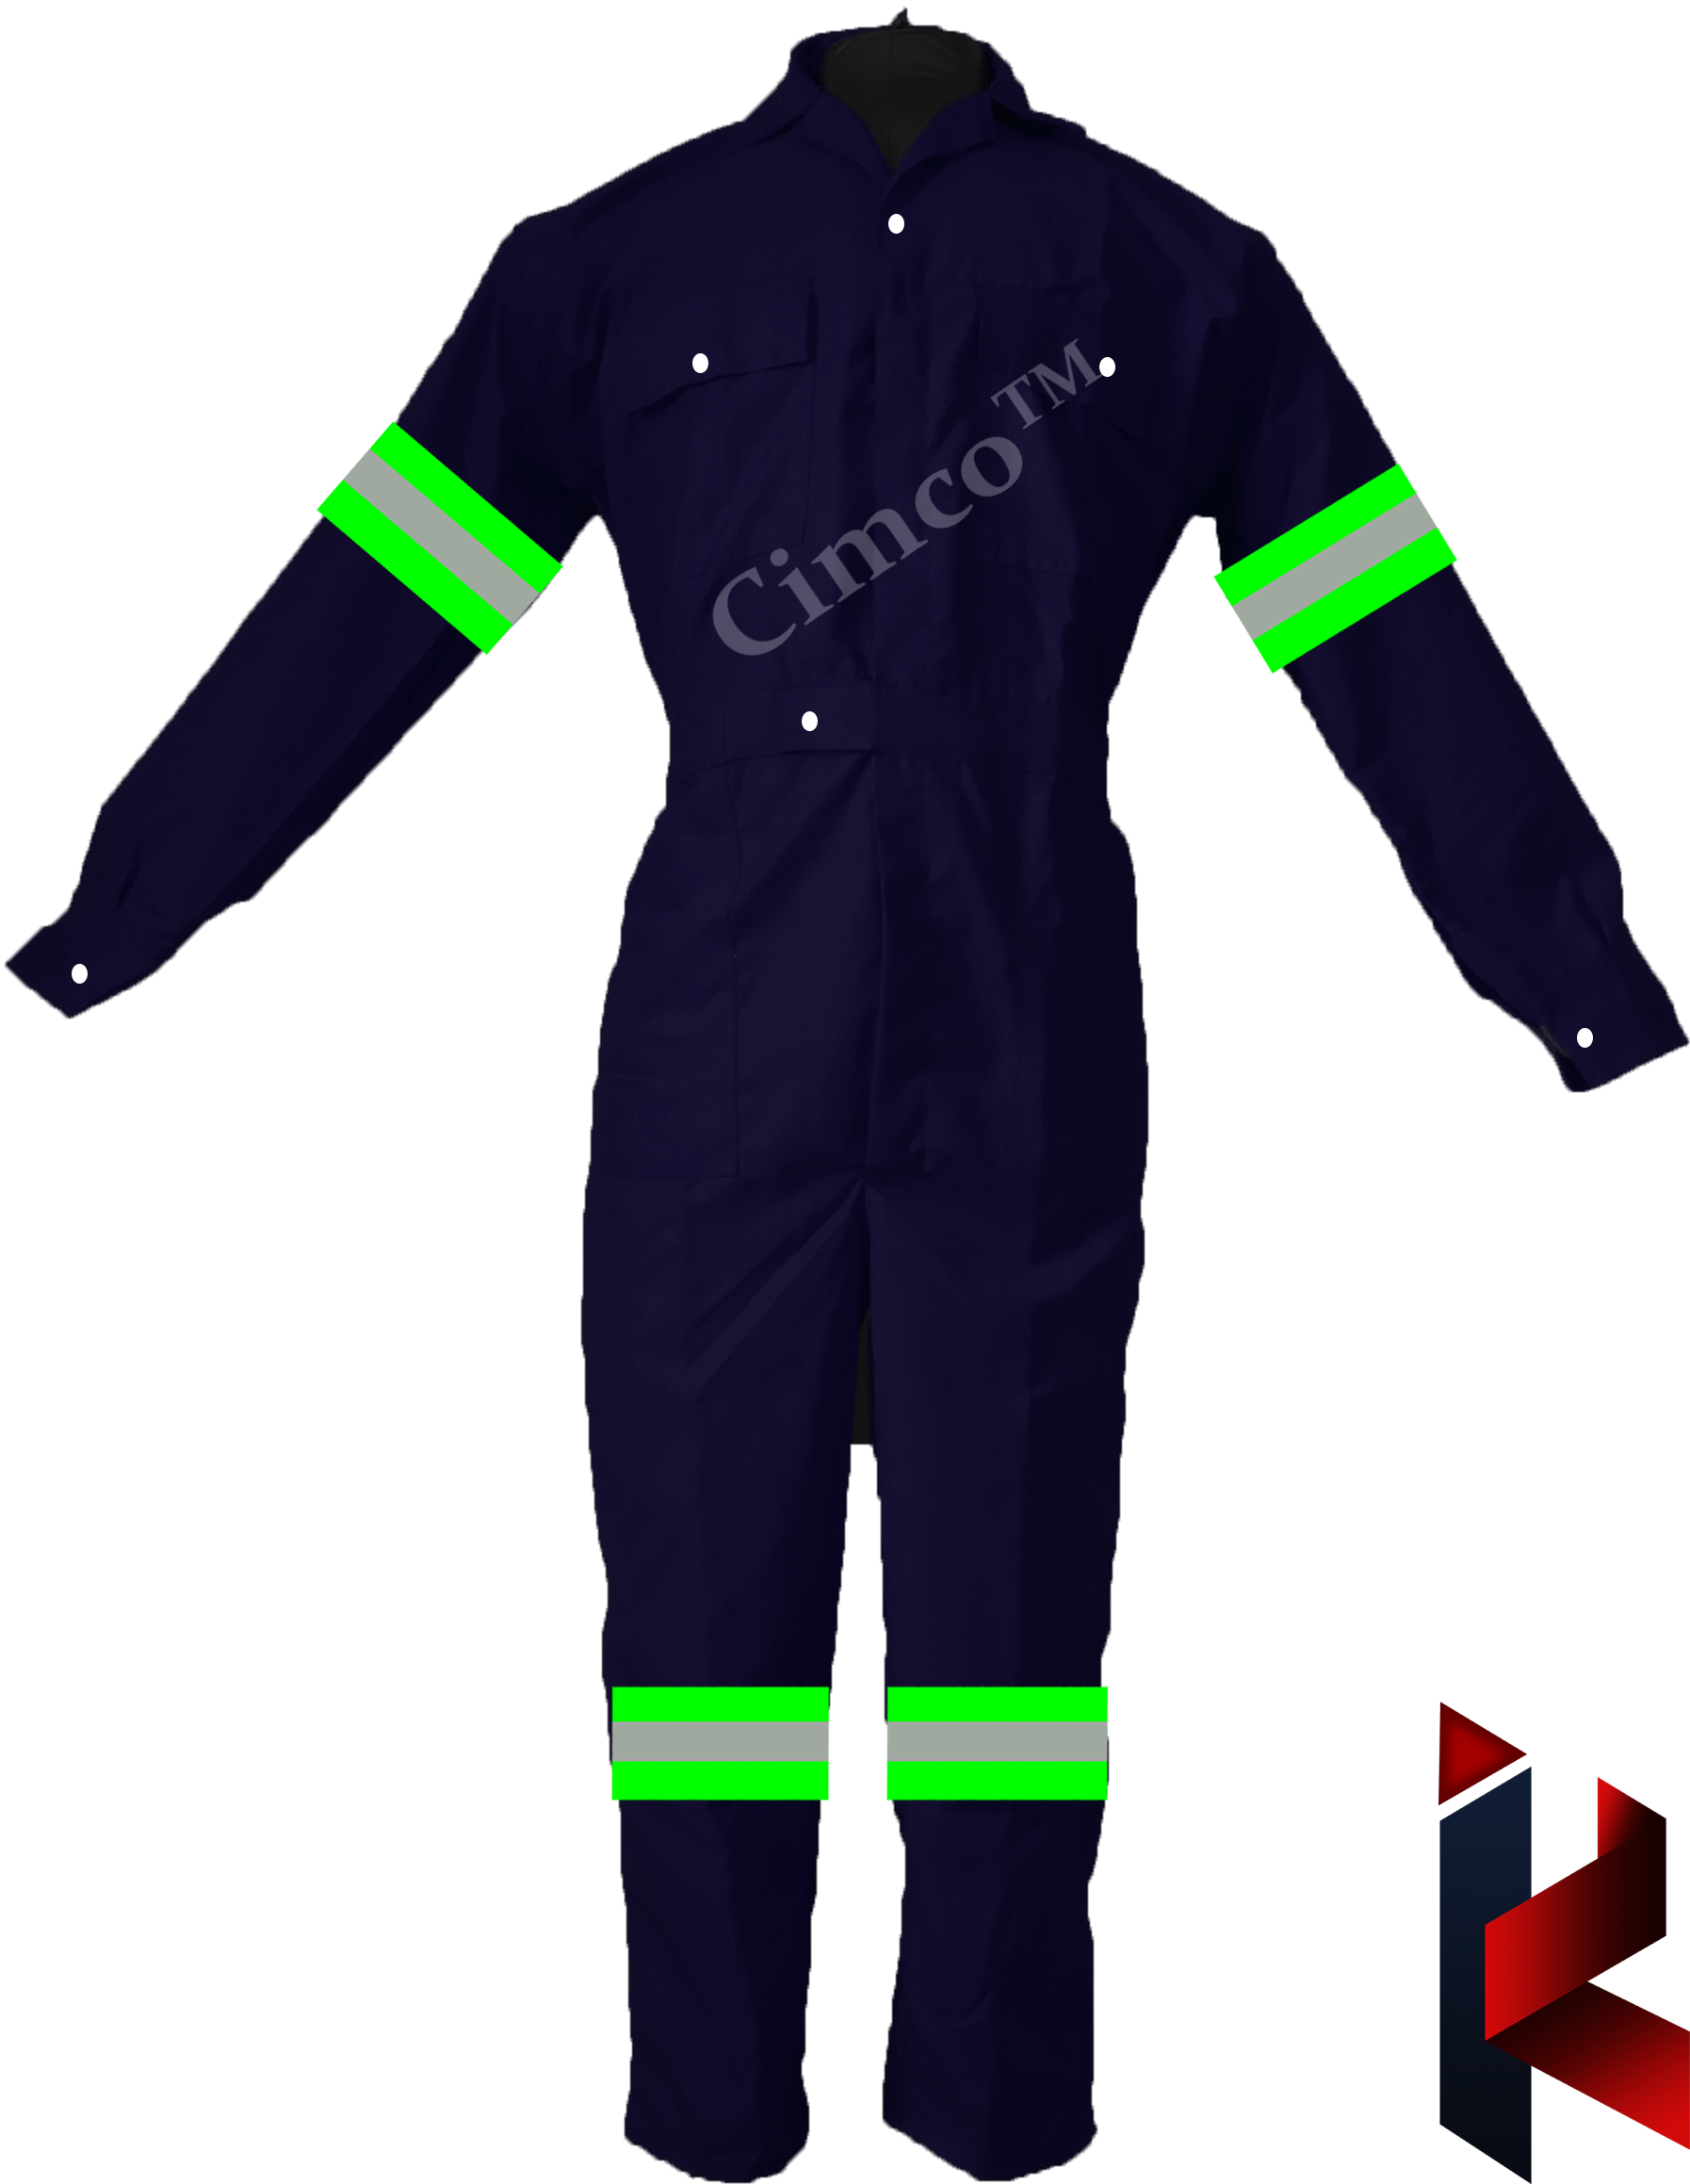 CIMCO | BOILERSUIT® 5409 FR NAVY BLUE with Test Certificate